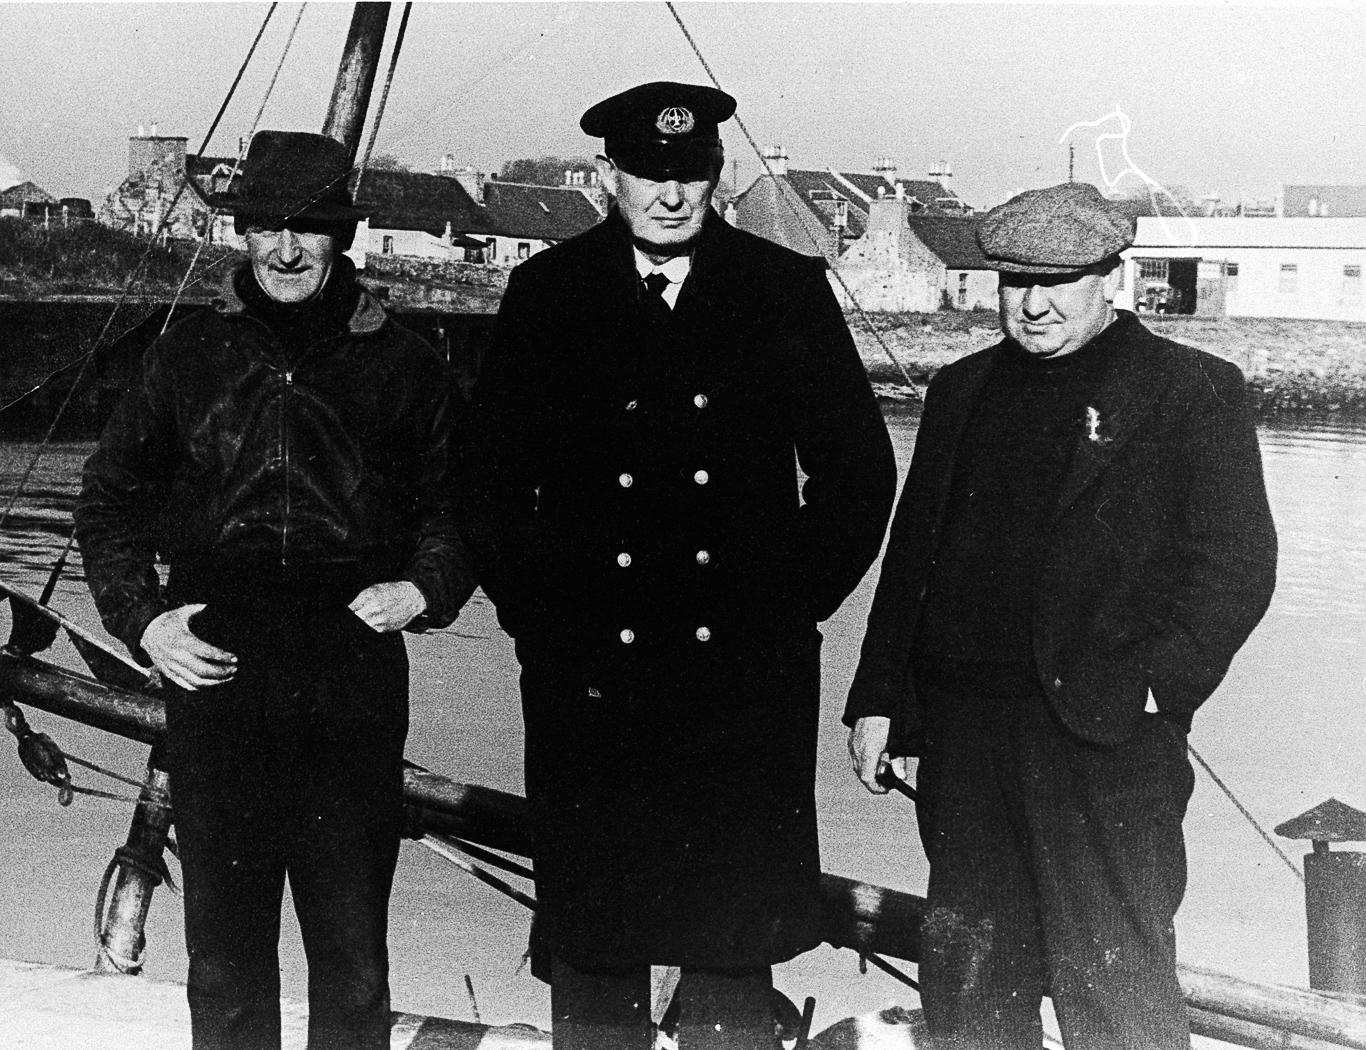 Portrait of ringnet skippers Andrew McCrindle and Tom McQuiston with Archie Girvan, Girvan, c.1960. Andrew McCrindle was skipper of 'Alipeds VII'. Archie Girvan was captain of the Ailsa Craig boat. L-R: Andrew McCrindle, Archie Girvan, Tom McQuiston.